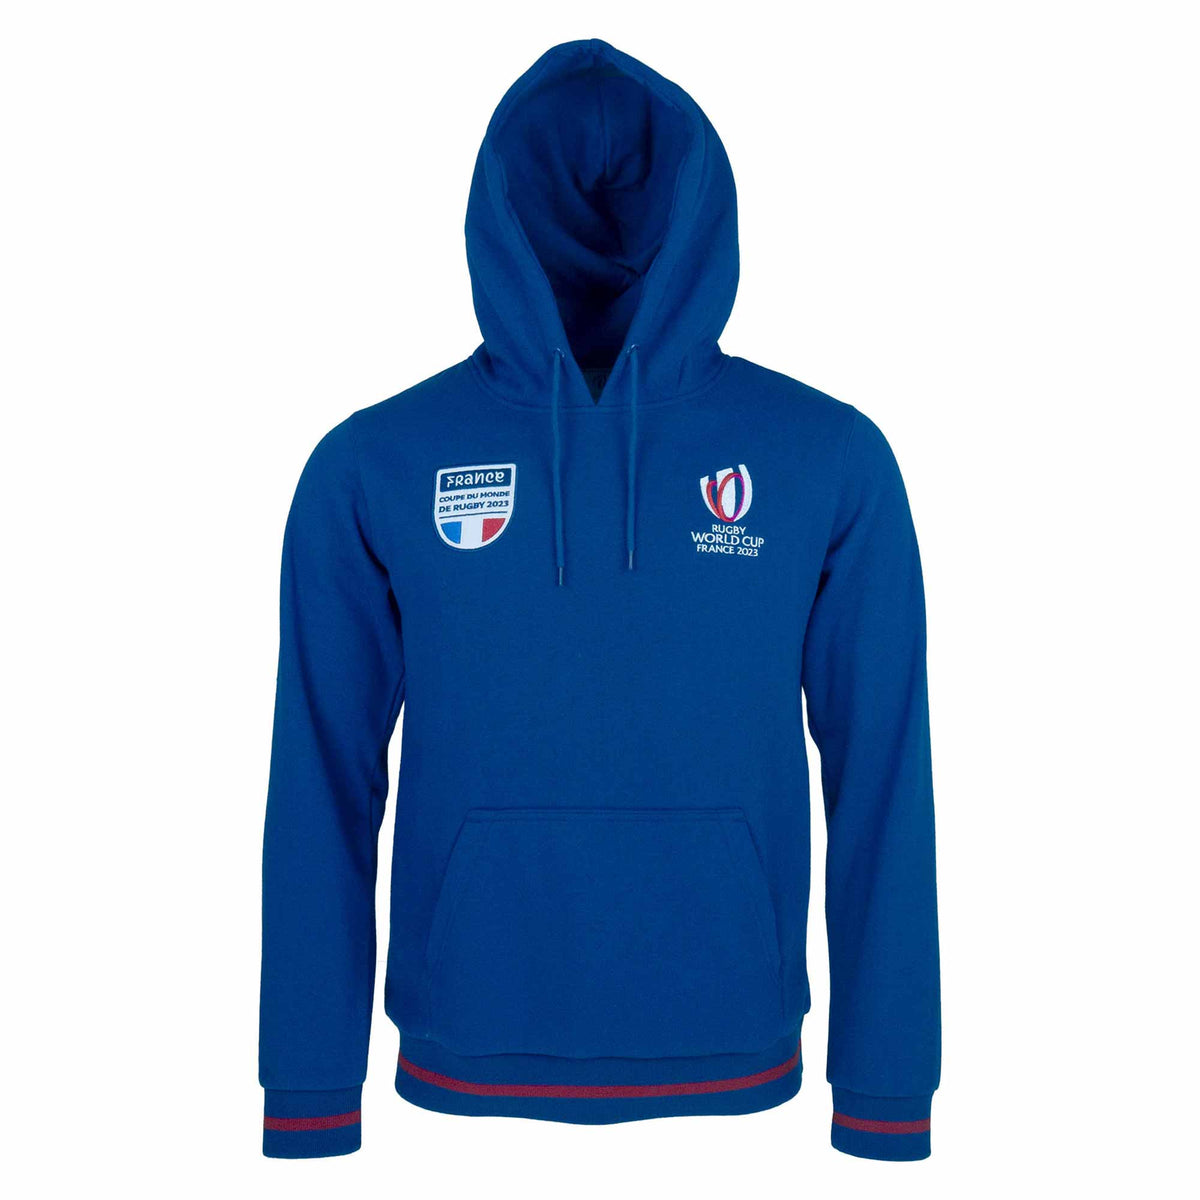 Rugby World Cup 2023 France Hoody - Navy |Hoody | RWC 2023 Supporter Collection | Absolute Rugby